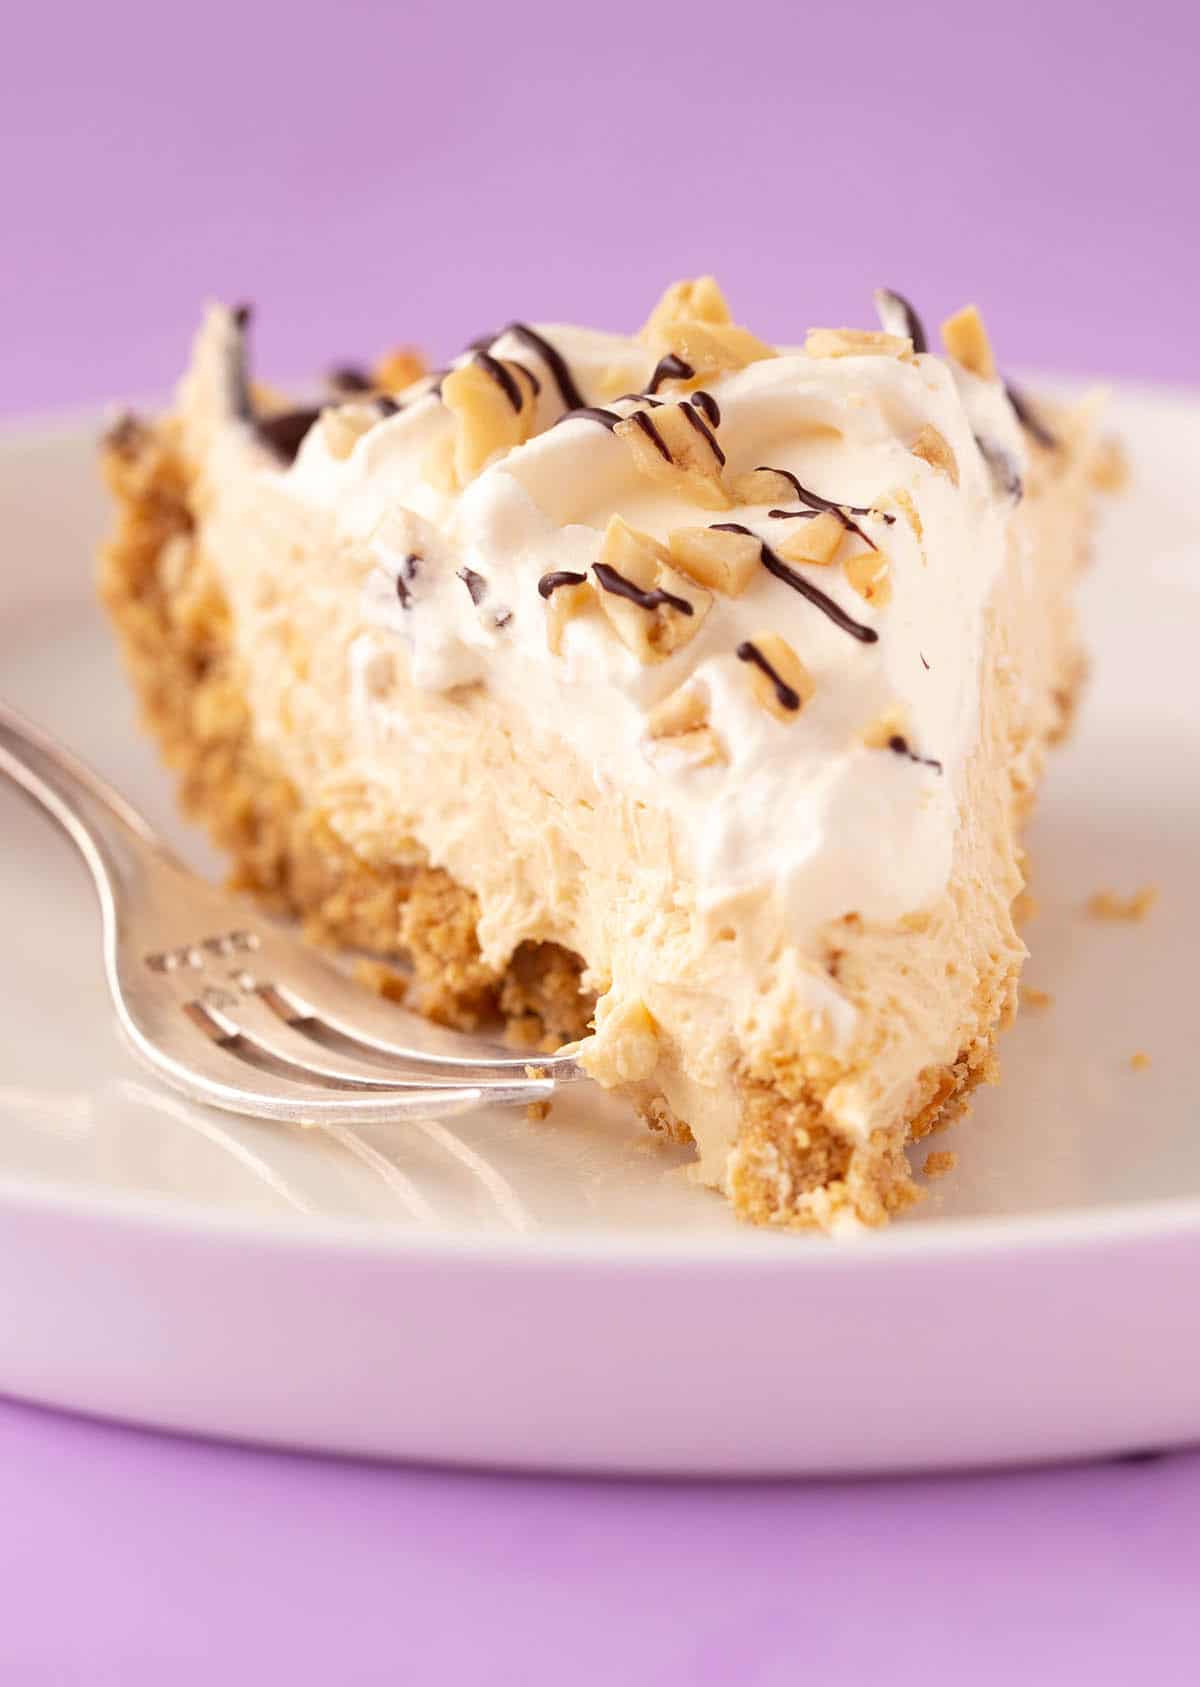 A slice of Peanut Butter Pie with a decorative fork